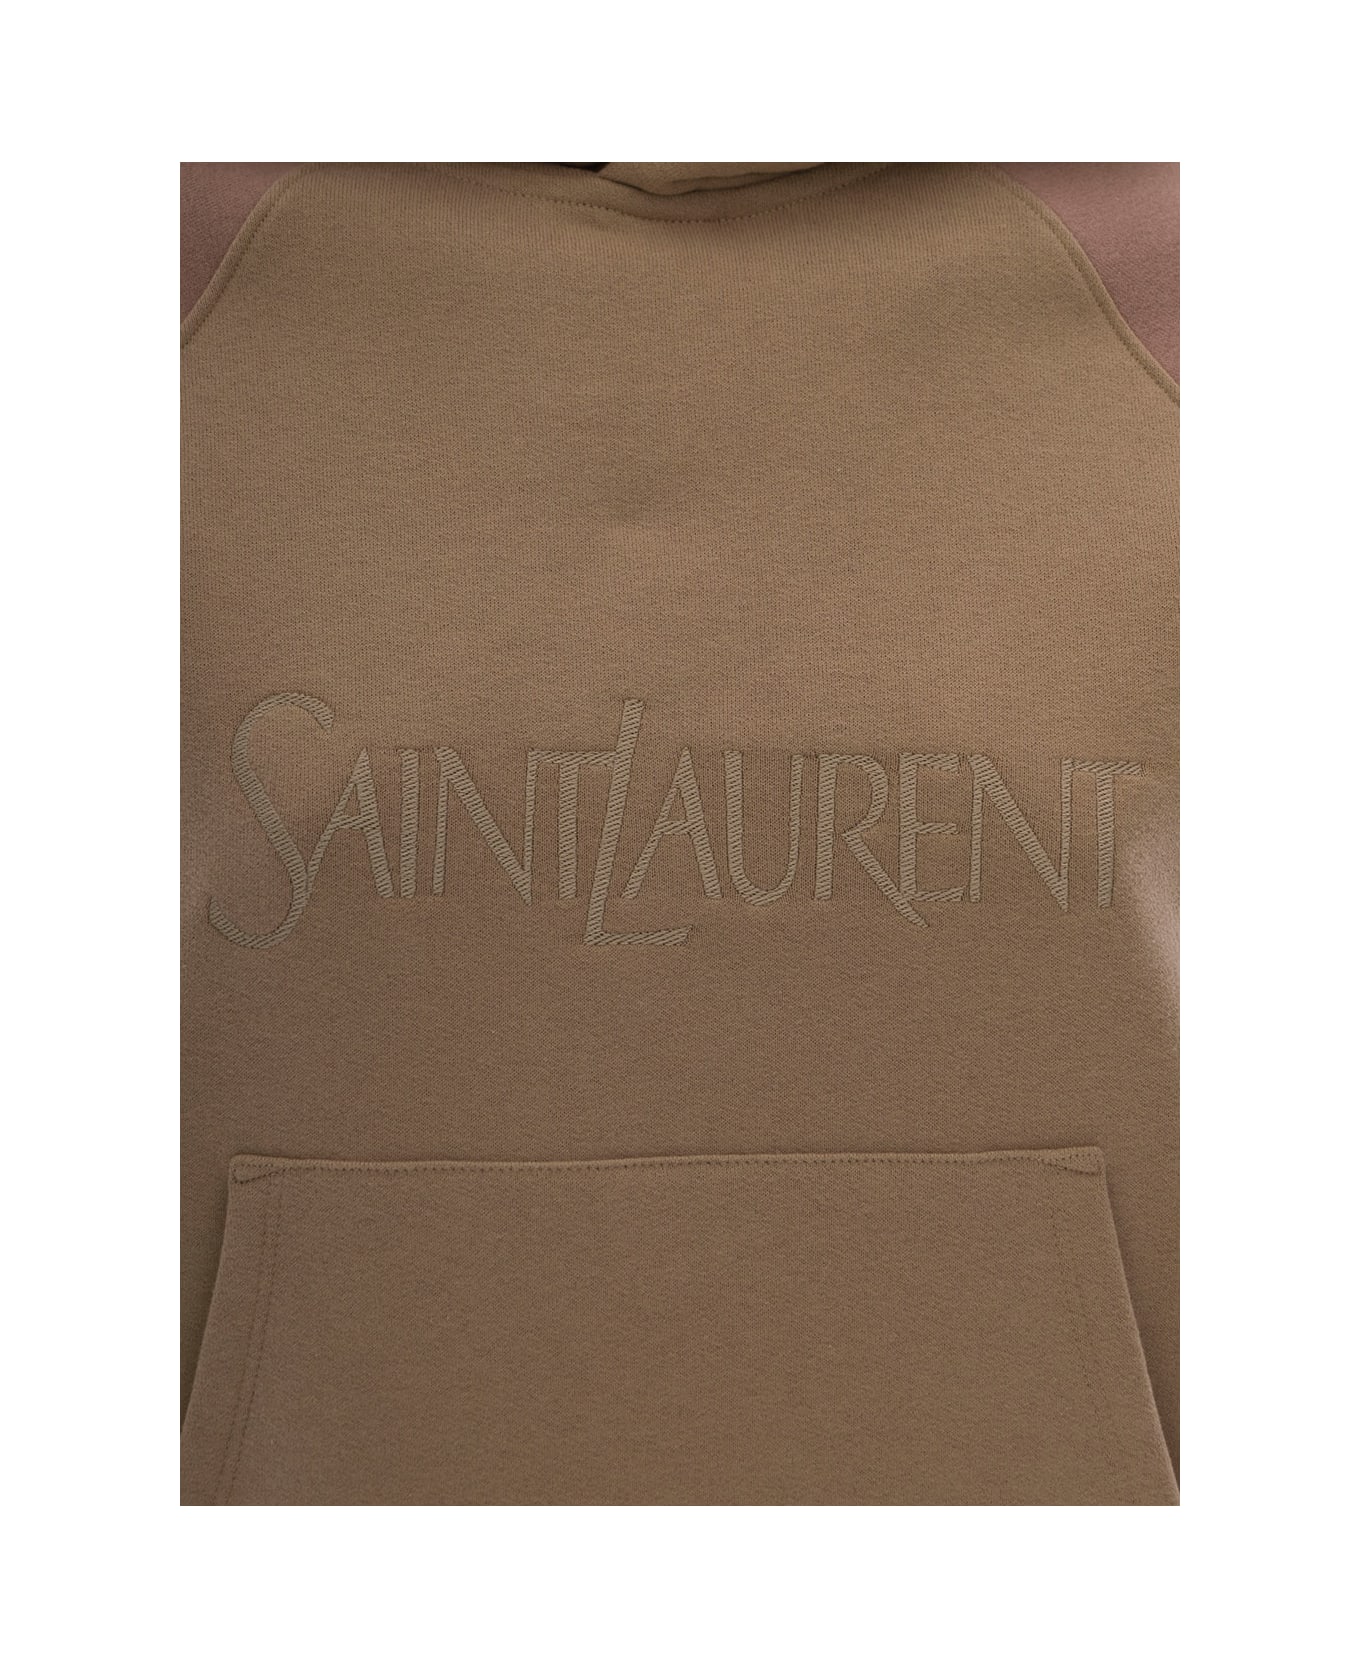 Saint Laurent Sweatshirt With Hood And Embroidered Logo - Saint Laurent vertical stripe embroidered shirt